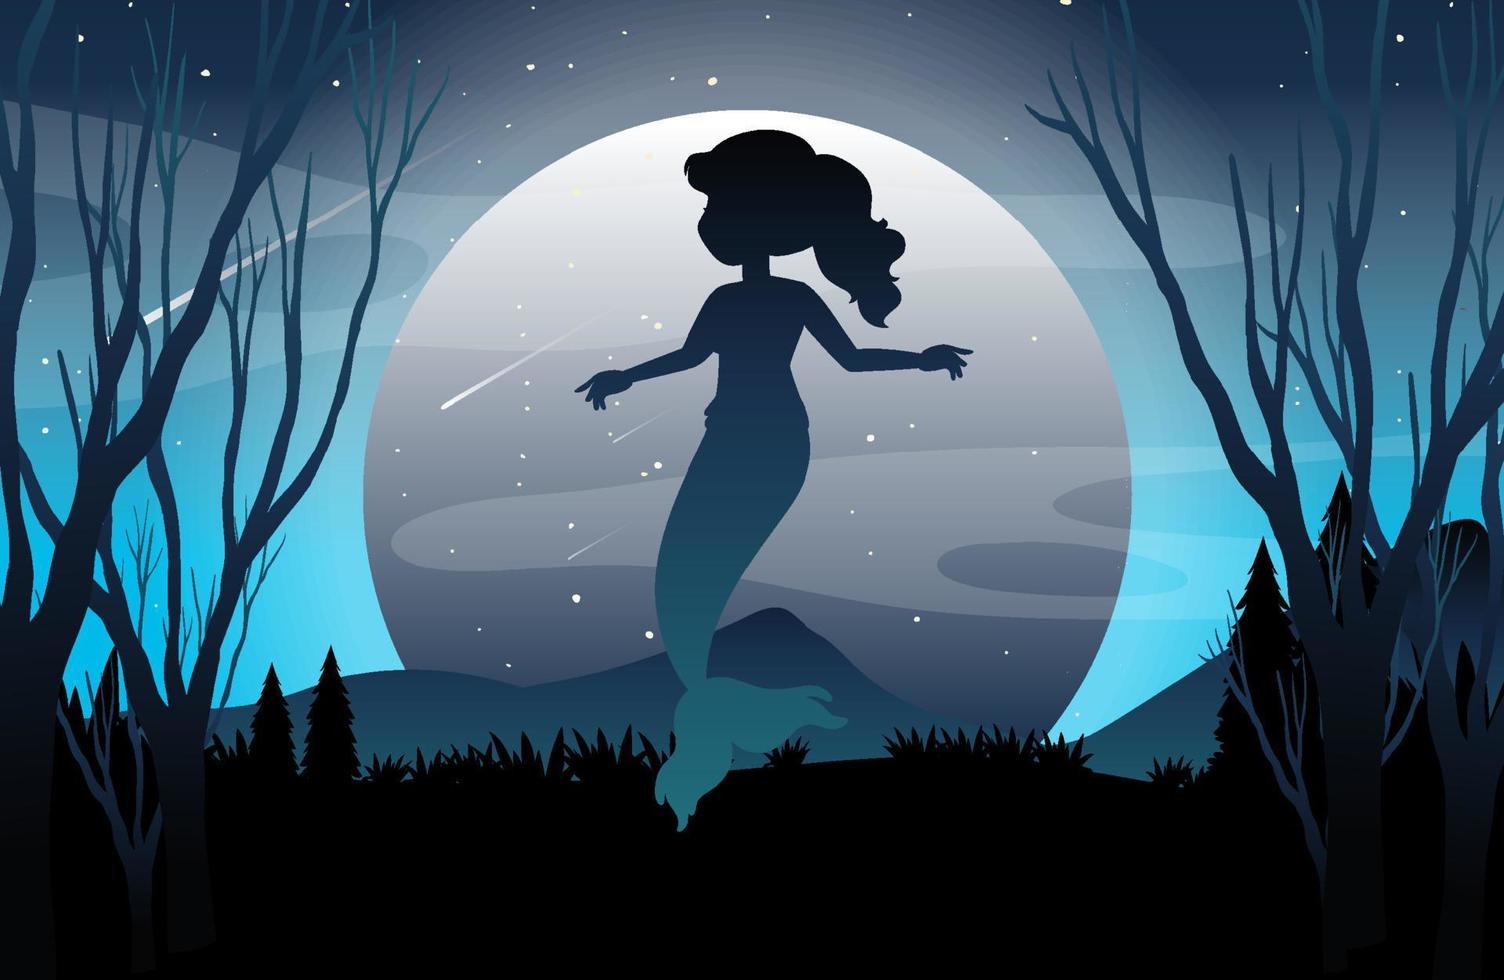 Full moon forest background with mermiad silhouette vector